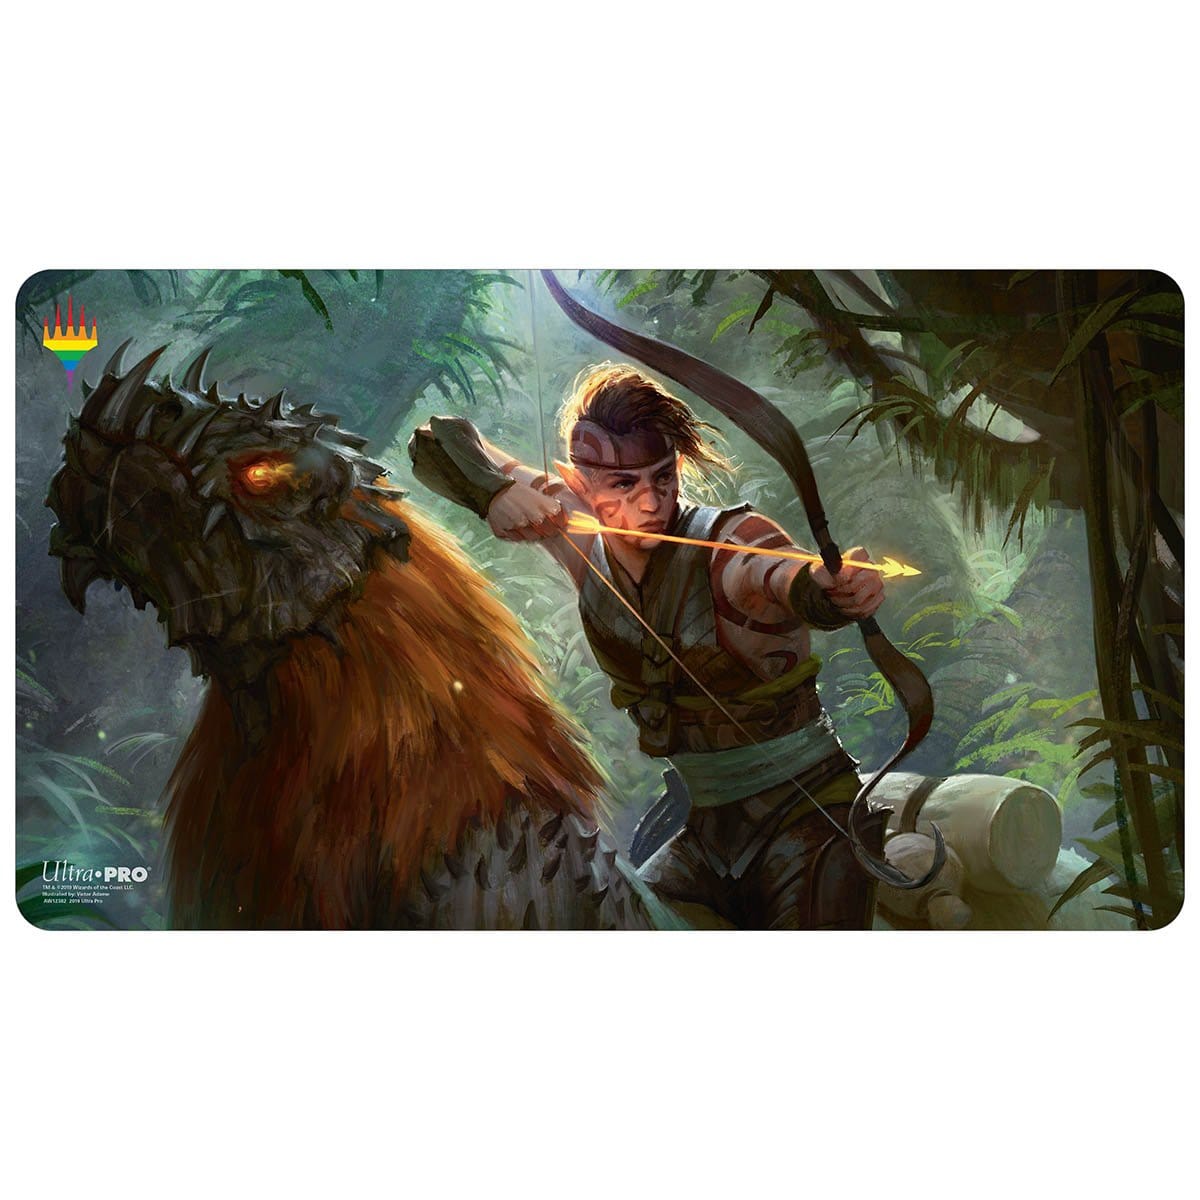 Hallar, the Firefletcher Playmat - Pride 2019 - Playmat - Original Magic Art - Accessories for Magic the Gathering and other card games